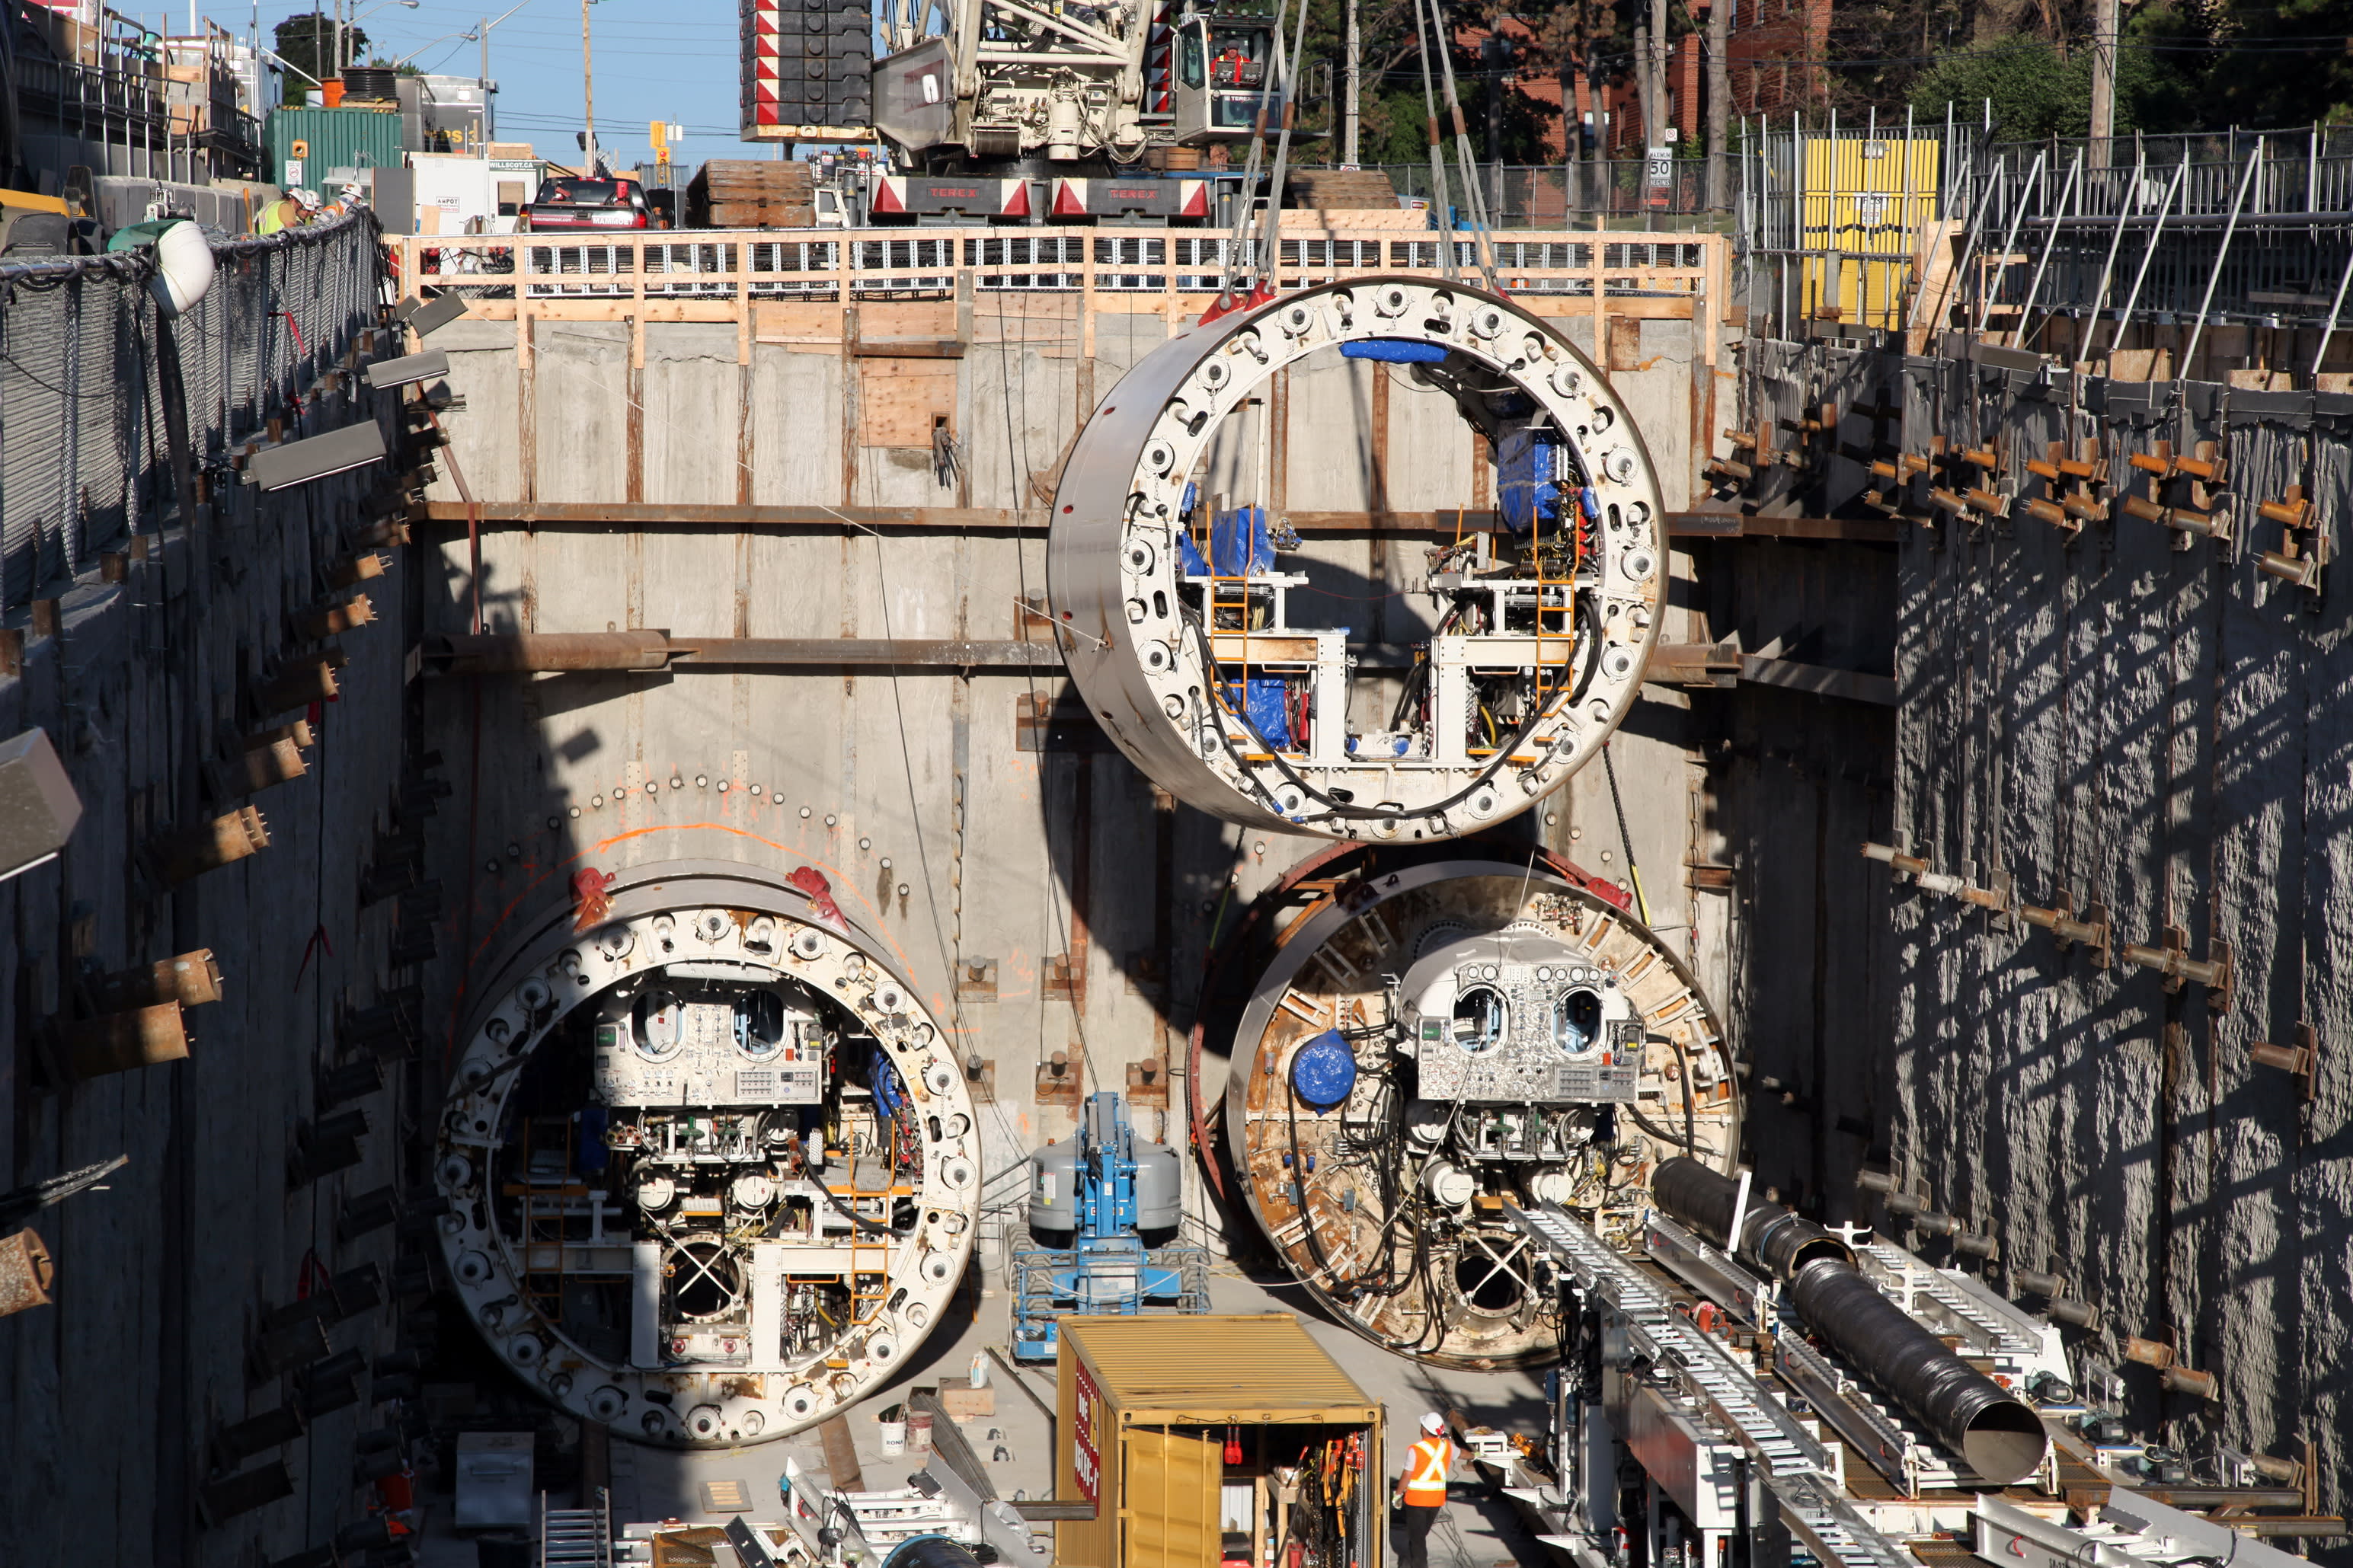 Image of a launch shaft, with tunnel boring machines being lowered, for the Eglinton Crosstown LRT.